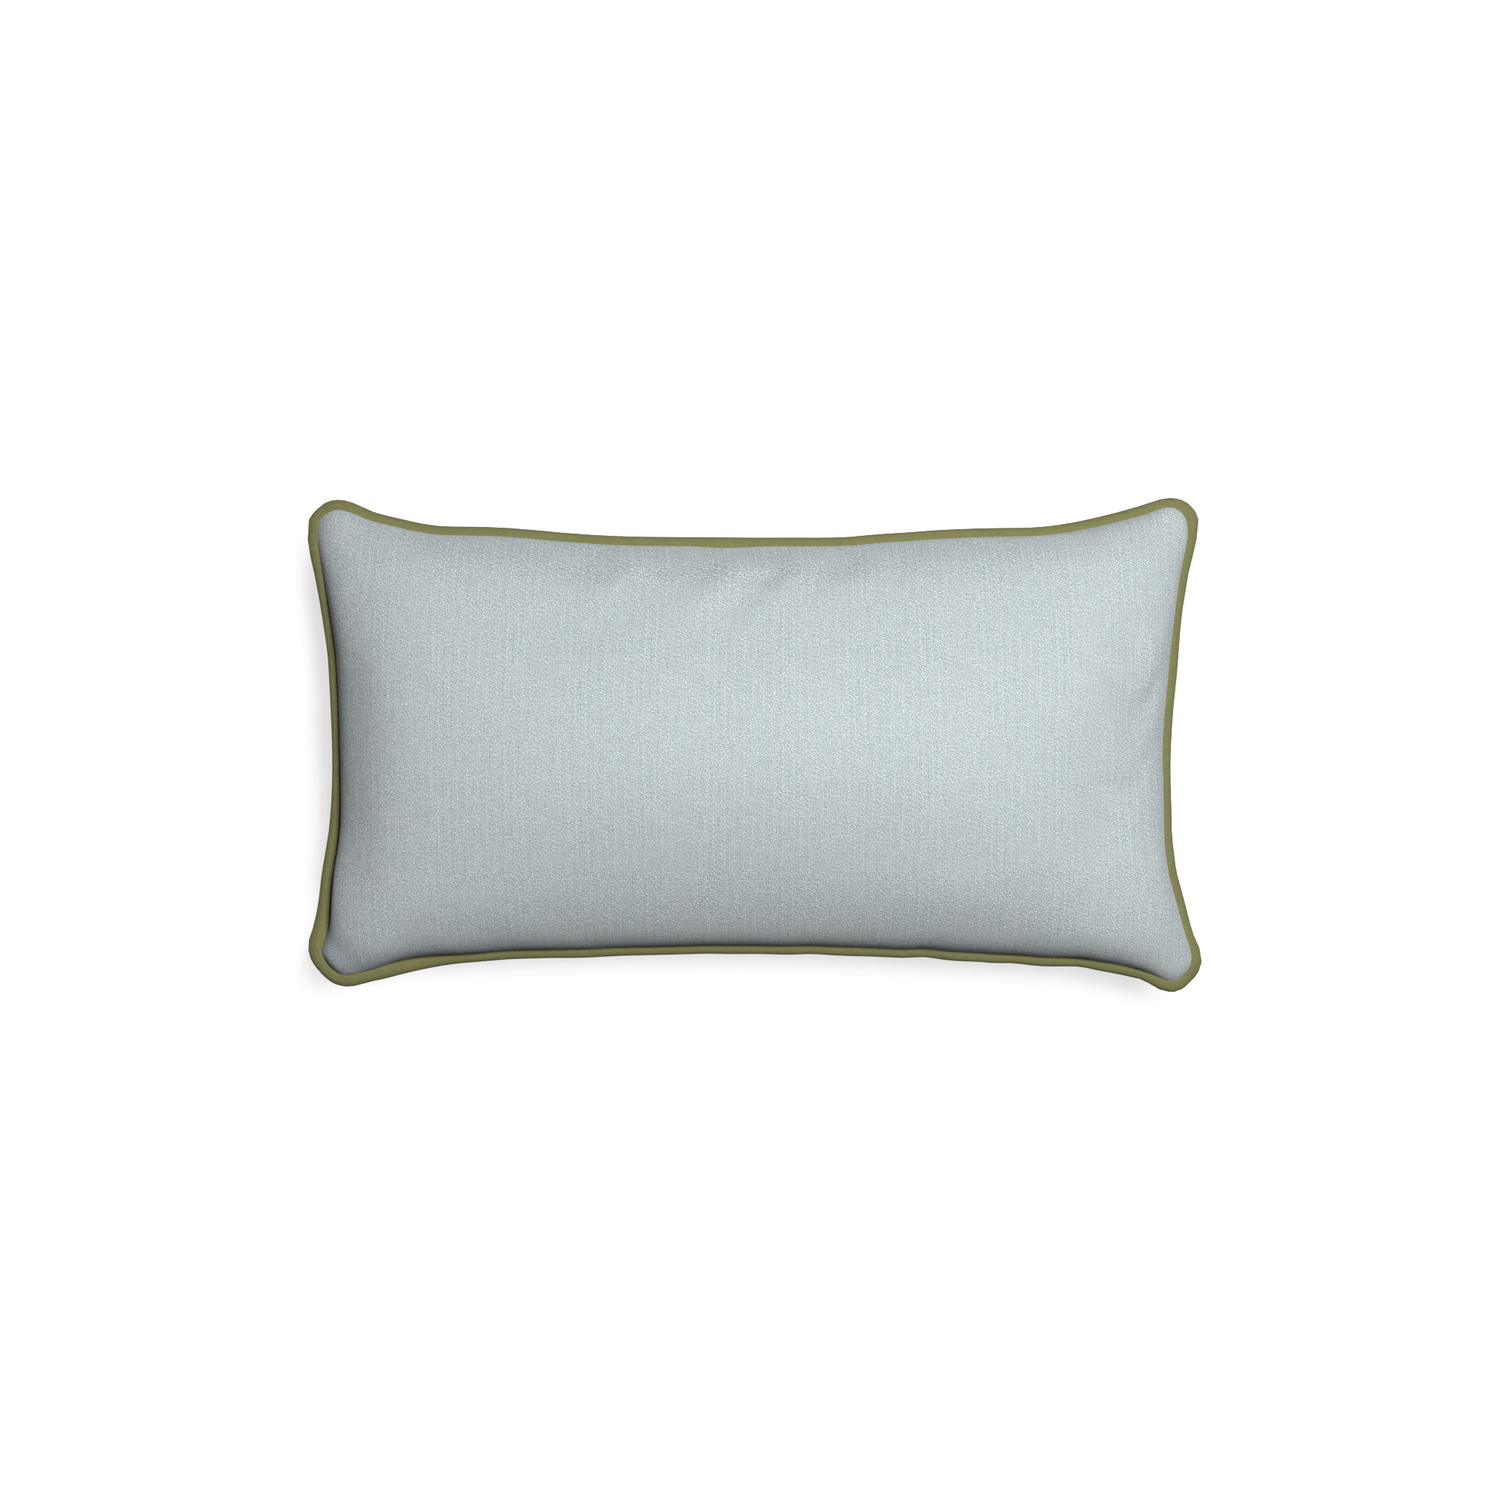 Petite-lumbar sea custom grey bluepillow with moss piping on white background